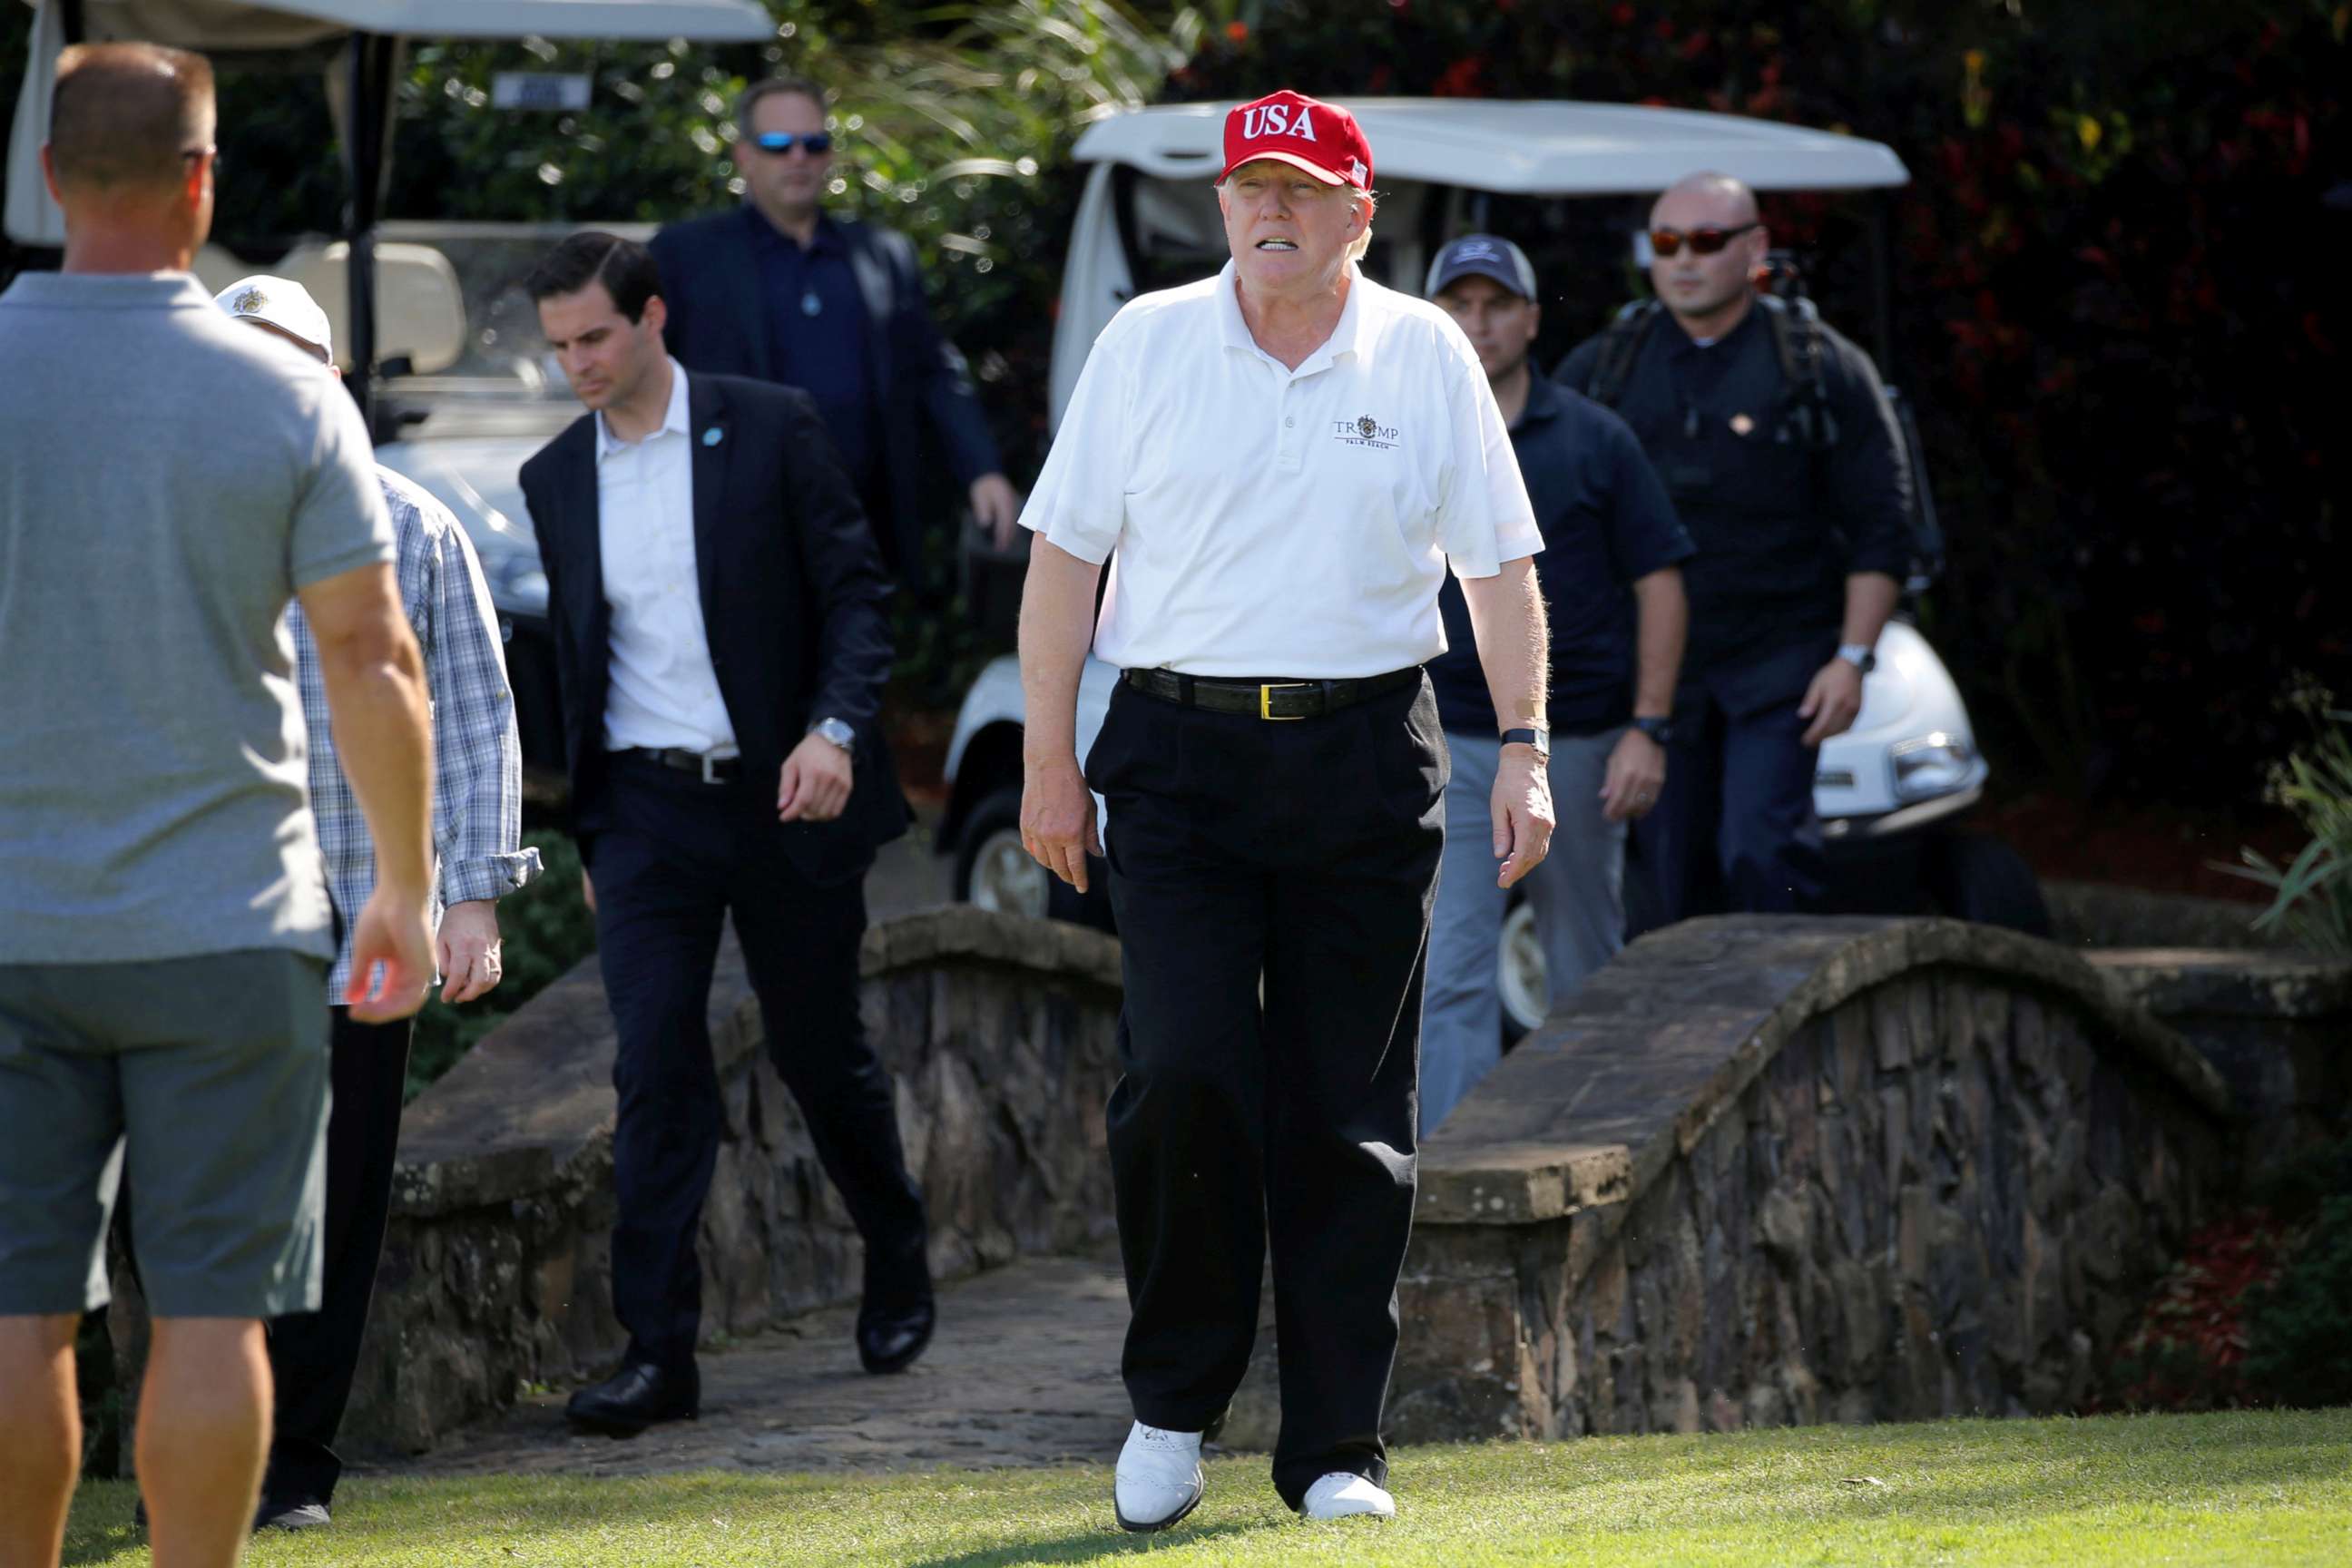 PHOTO: President Donald Trump arrives to play host to members of the U.S. Coast Guard he invited to play golf in West Palm Beach, Florida, Dec. 29, 2017.